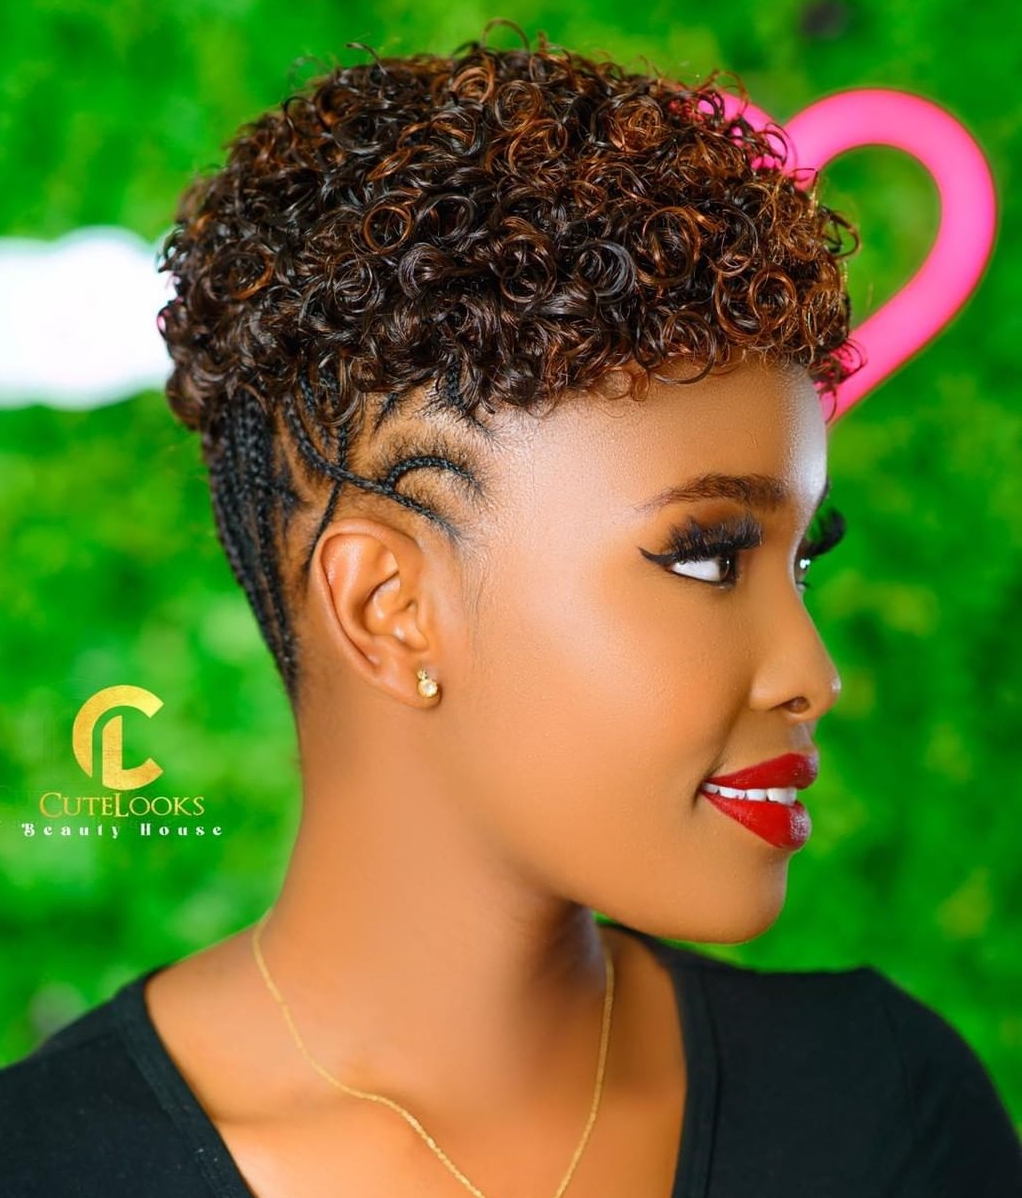 33 Beautiful Crochet Hairstyles You'll Want To Copy This Fall | Essence